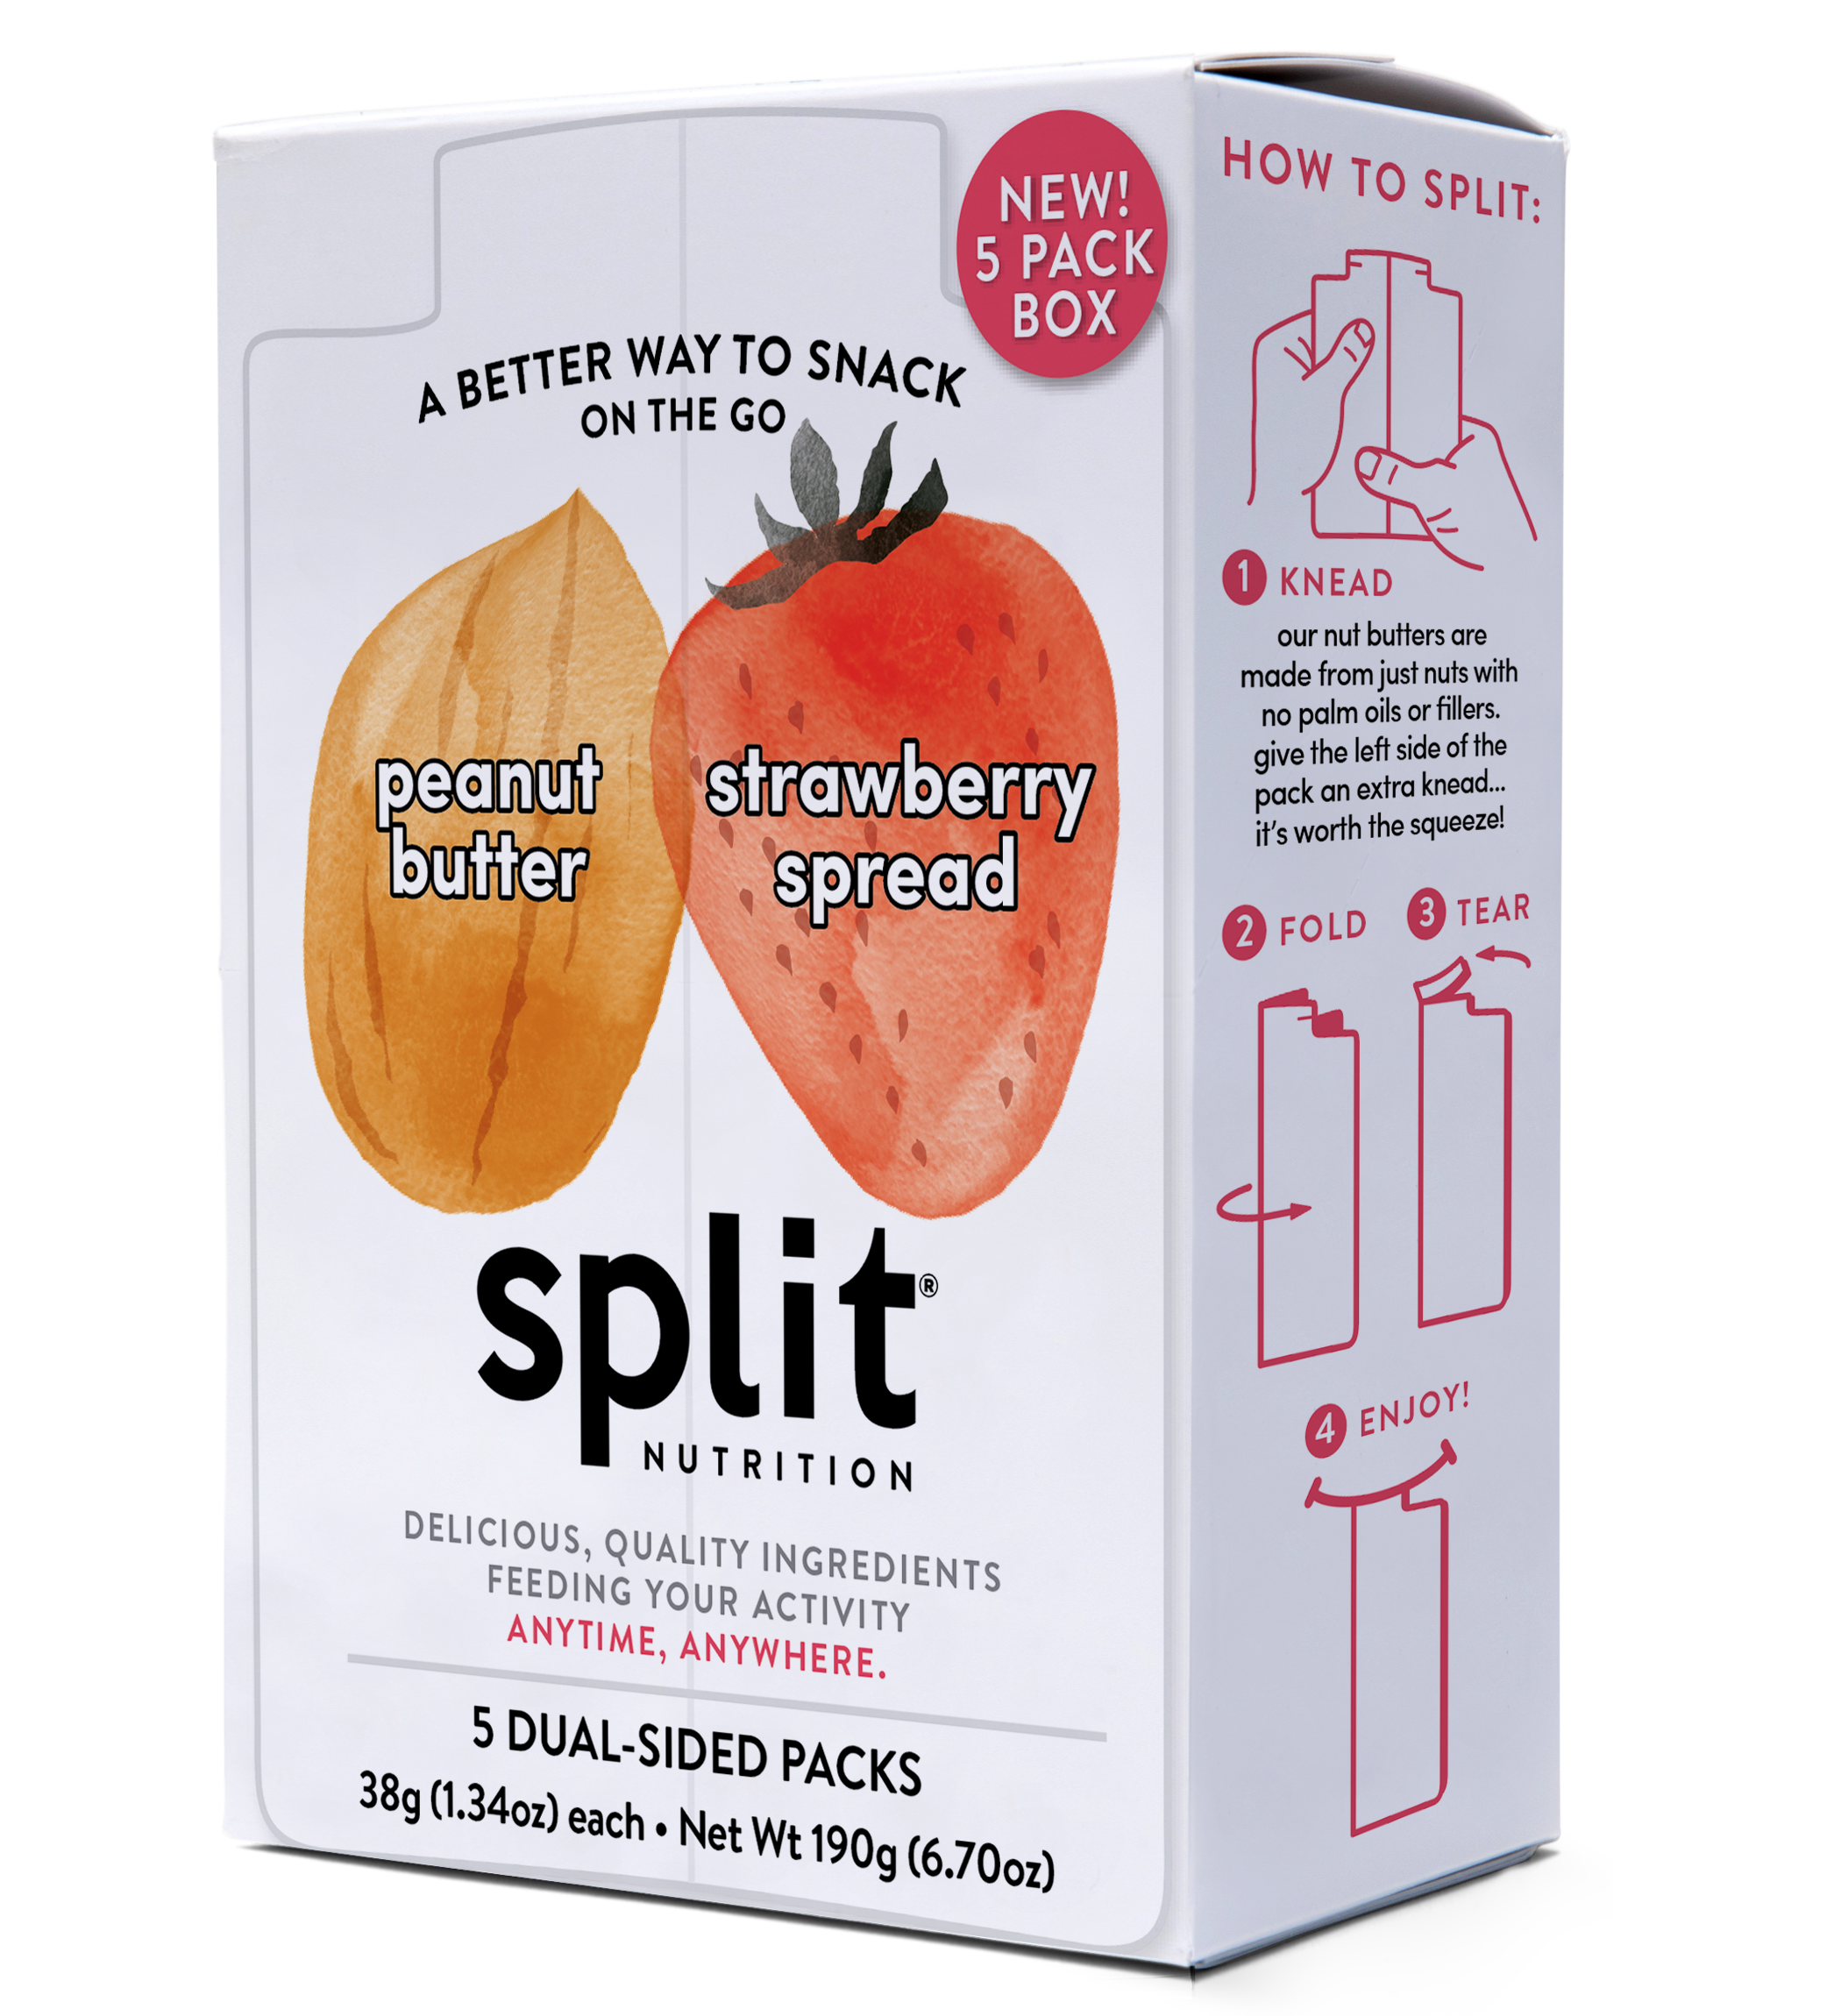 Split Nutrition Peanut Butter and Strawberry Fruit Spread (5ct box) 8 innerpacks per case 6.7 oz